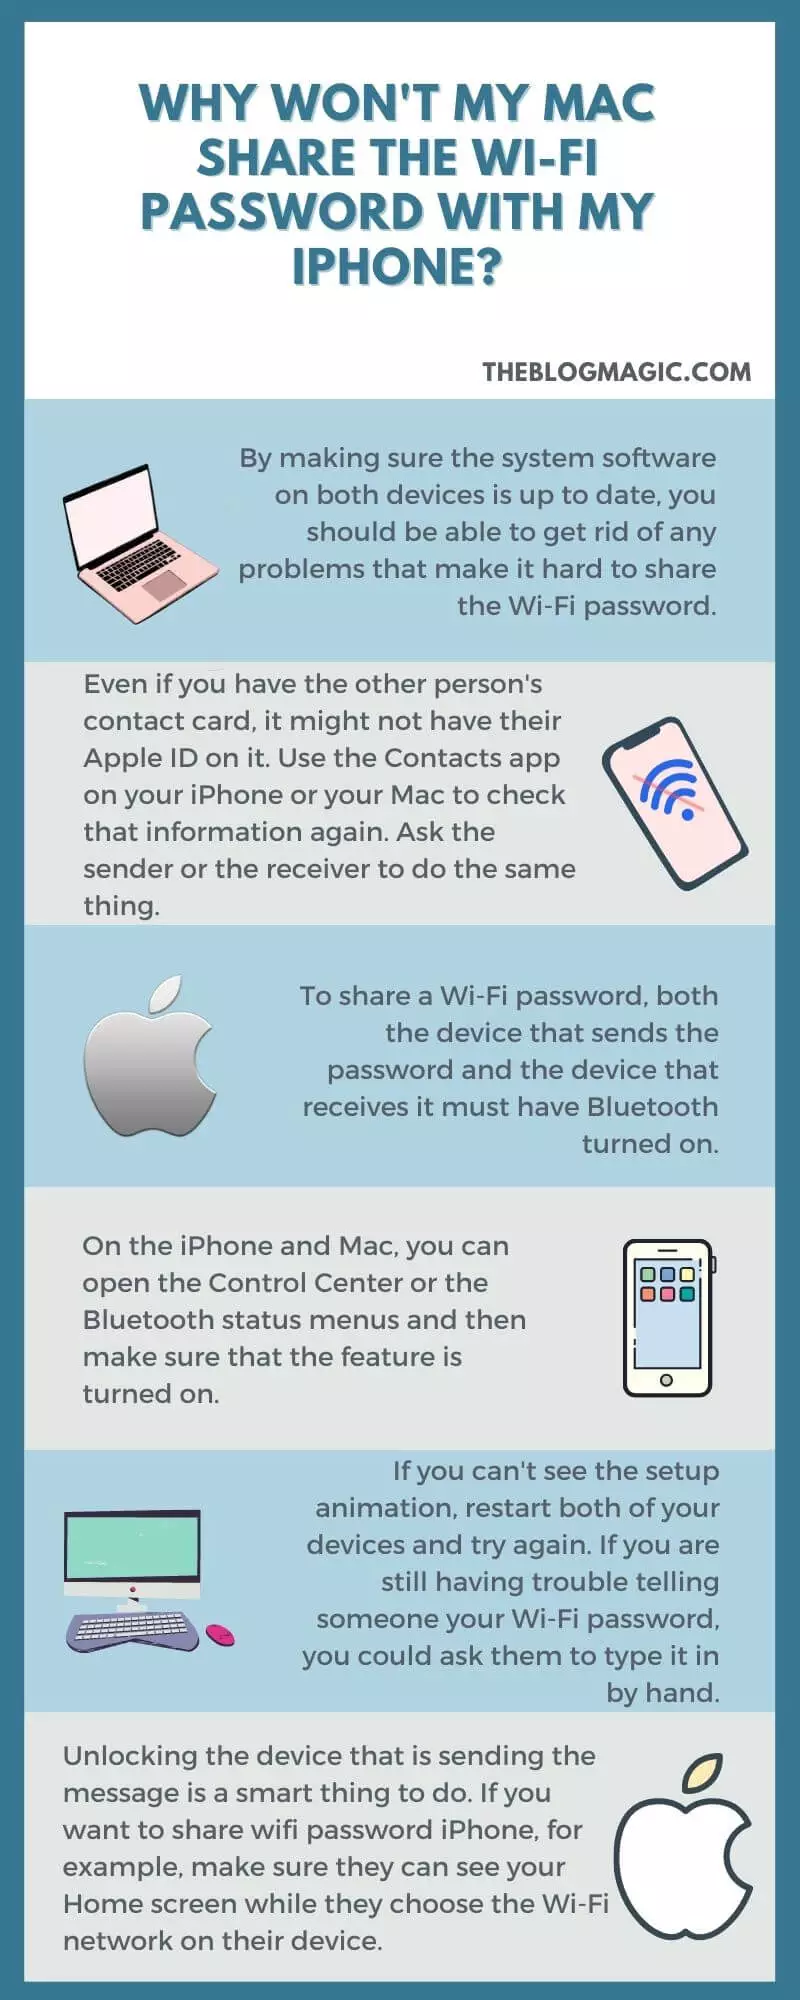 Why Won't My Mac Share the Wi-Fi password With My iPhone